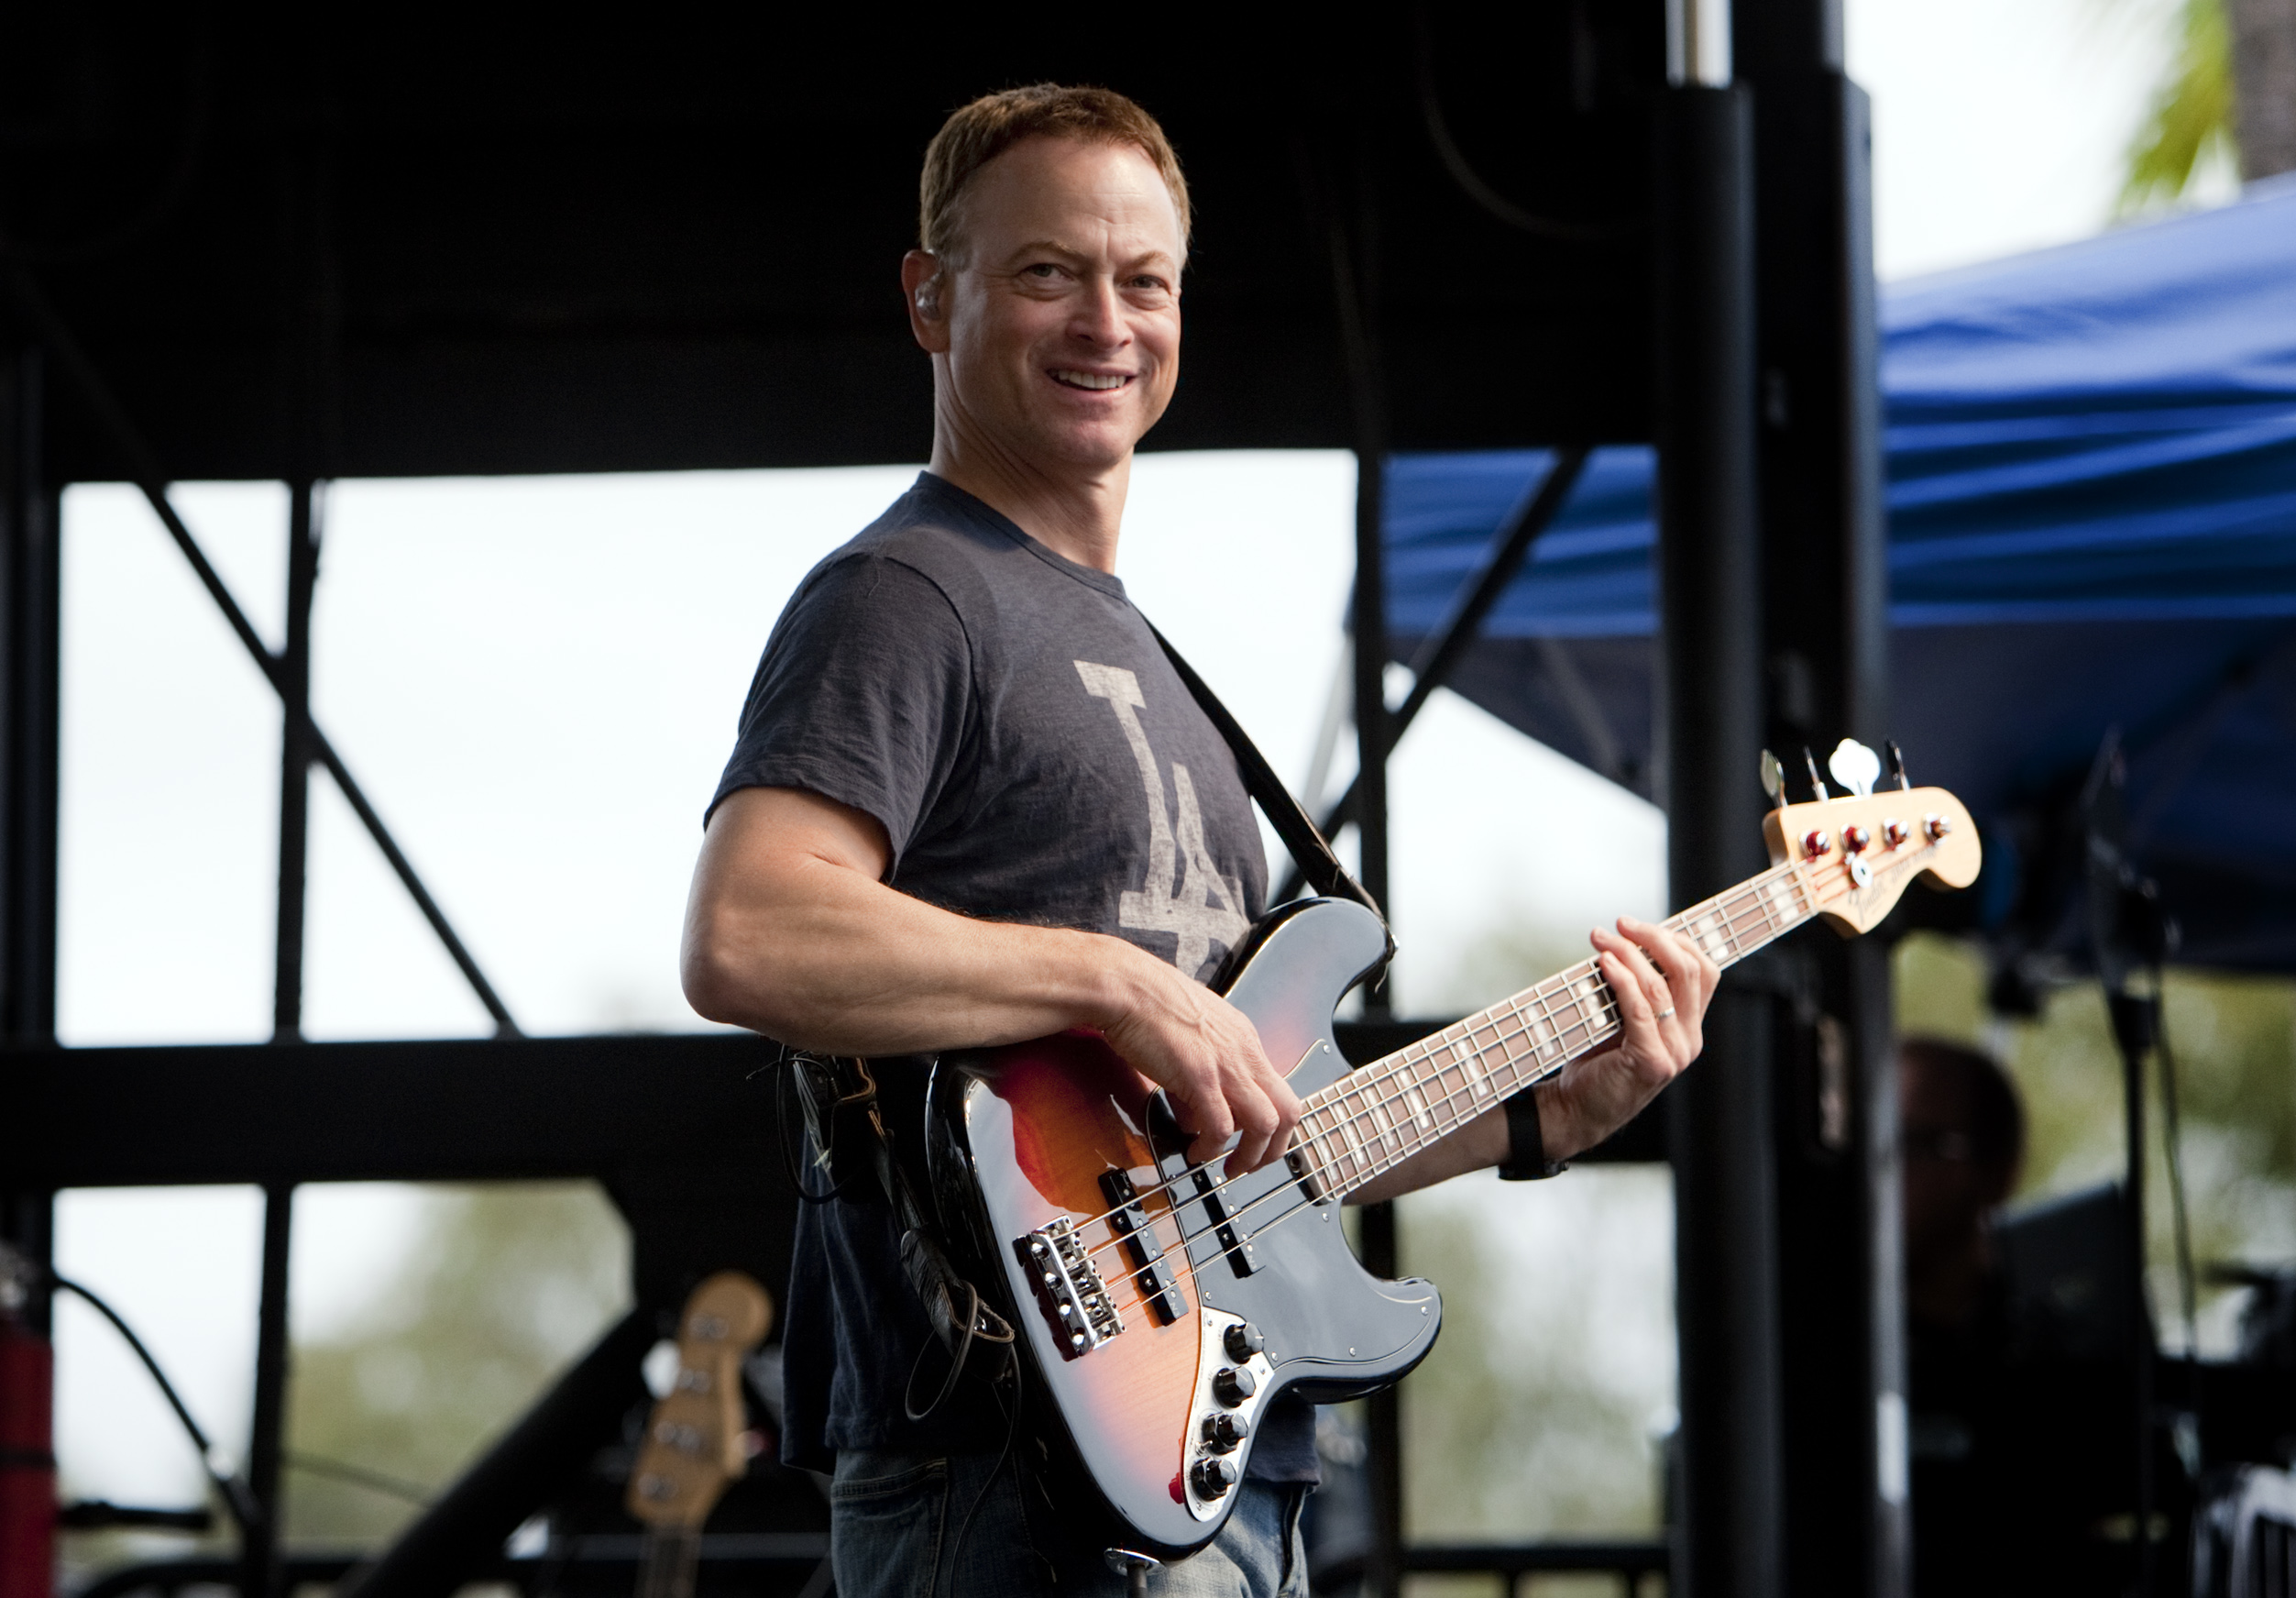 Gary Sinise on bass performing with his Lt. Dan Band for the wounded warriors, their families and hospital staff in front of the Naval Medical Center in San Diego on October 20, 2012 | Source: Getty Images